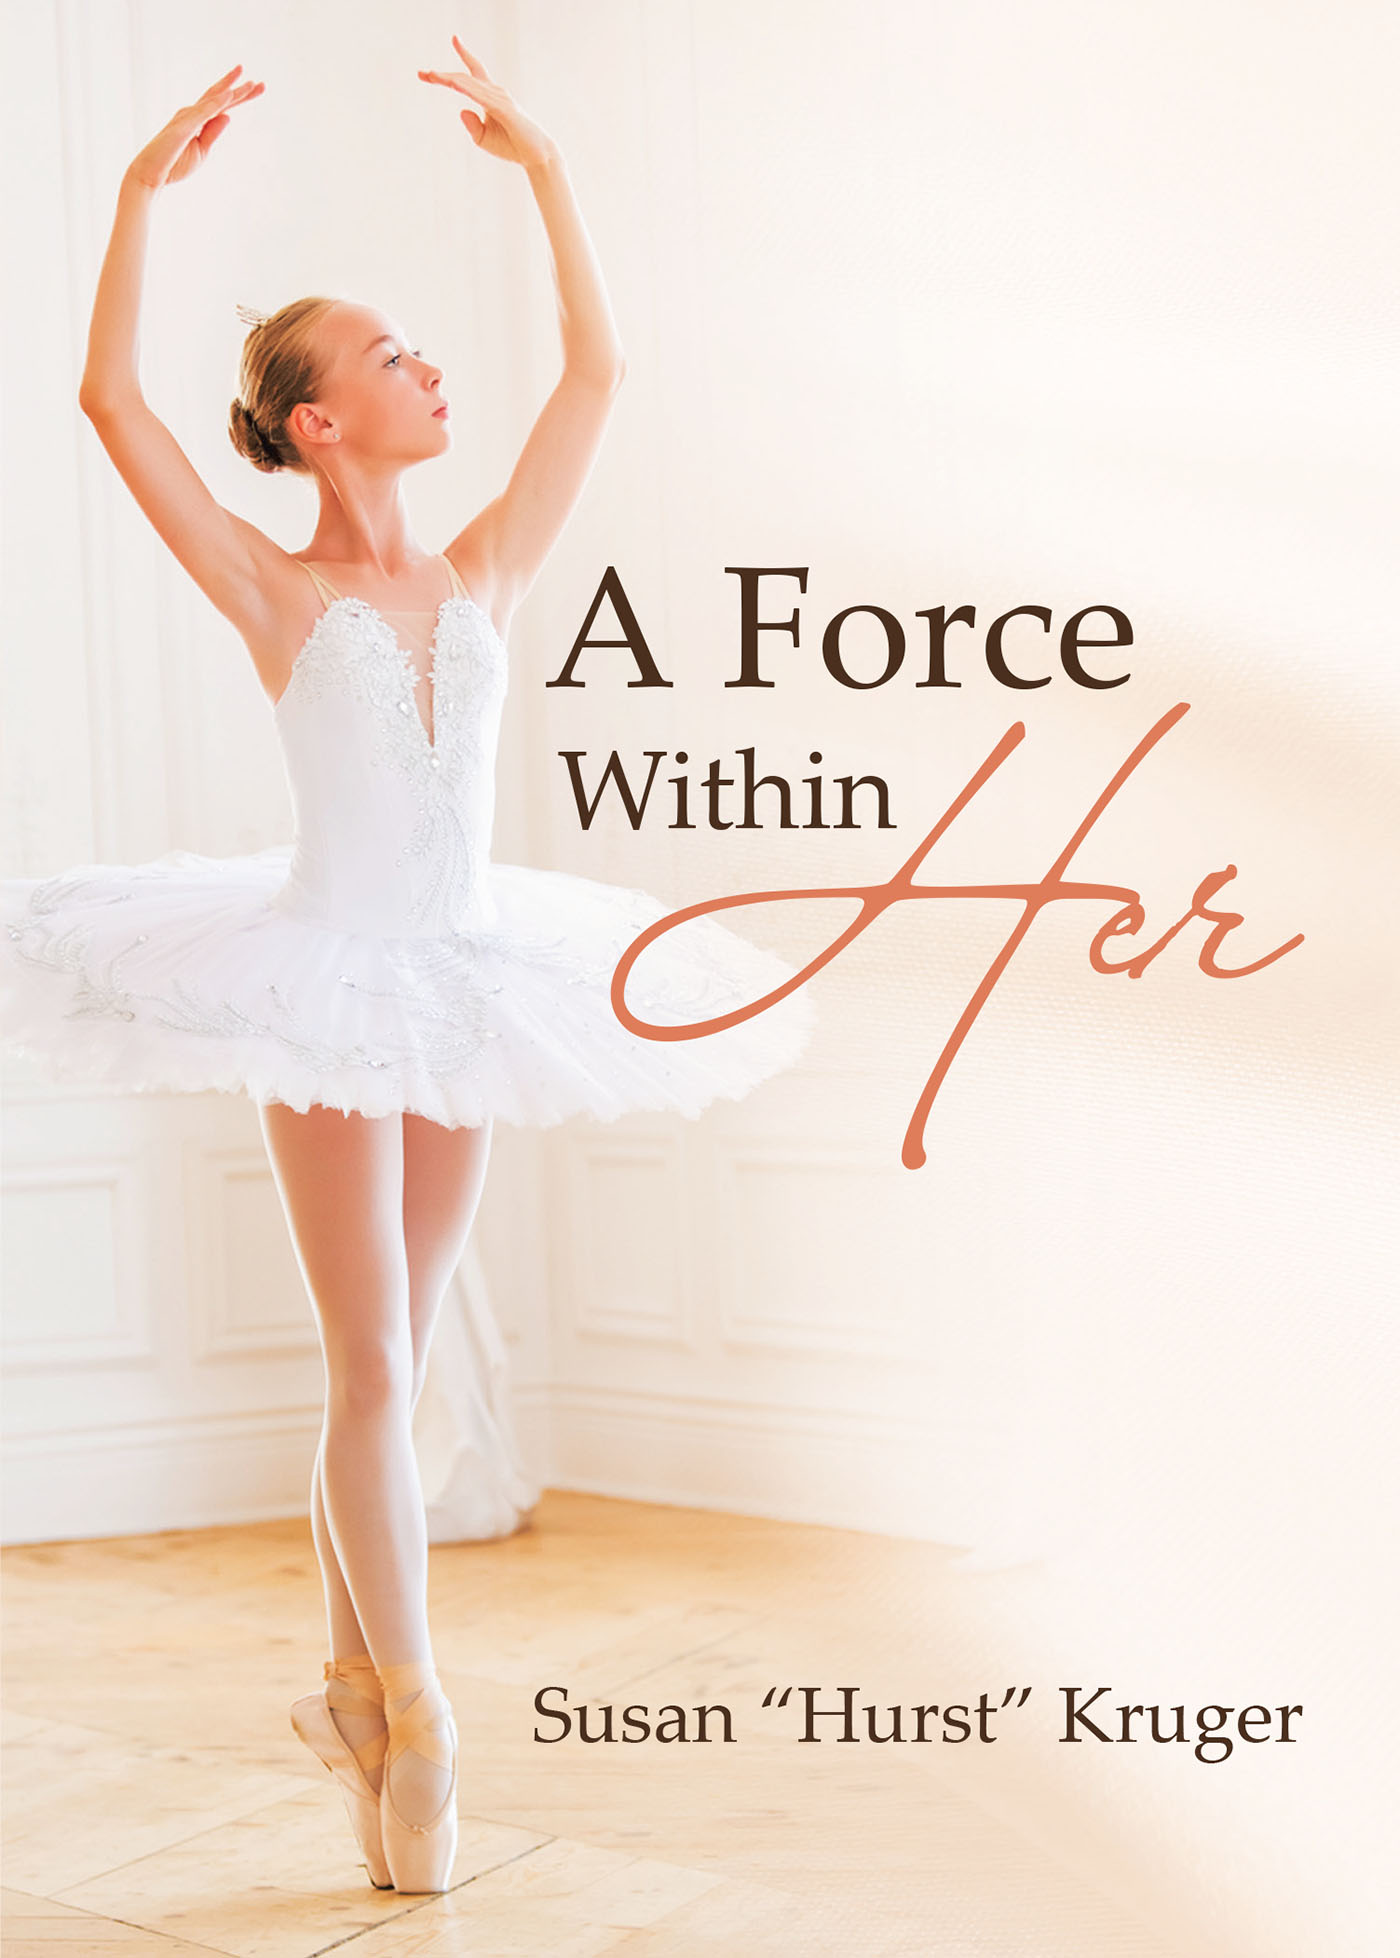 Author Susan "Hurst" Kruger’s New Book, "A Force Within Her," is a Fictional Story About a Young Woman Named Comique Who Works to Struggles with ADD